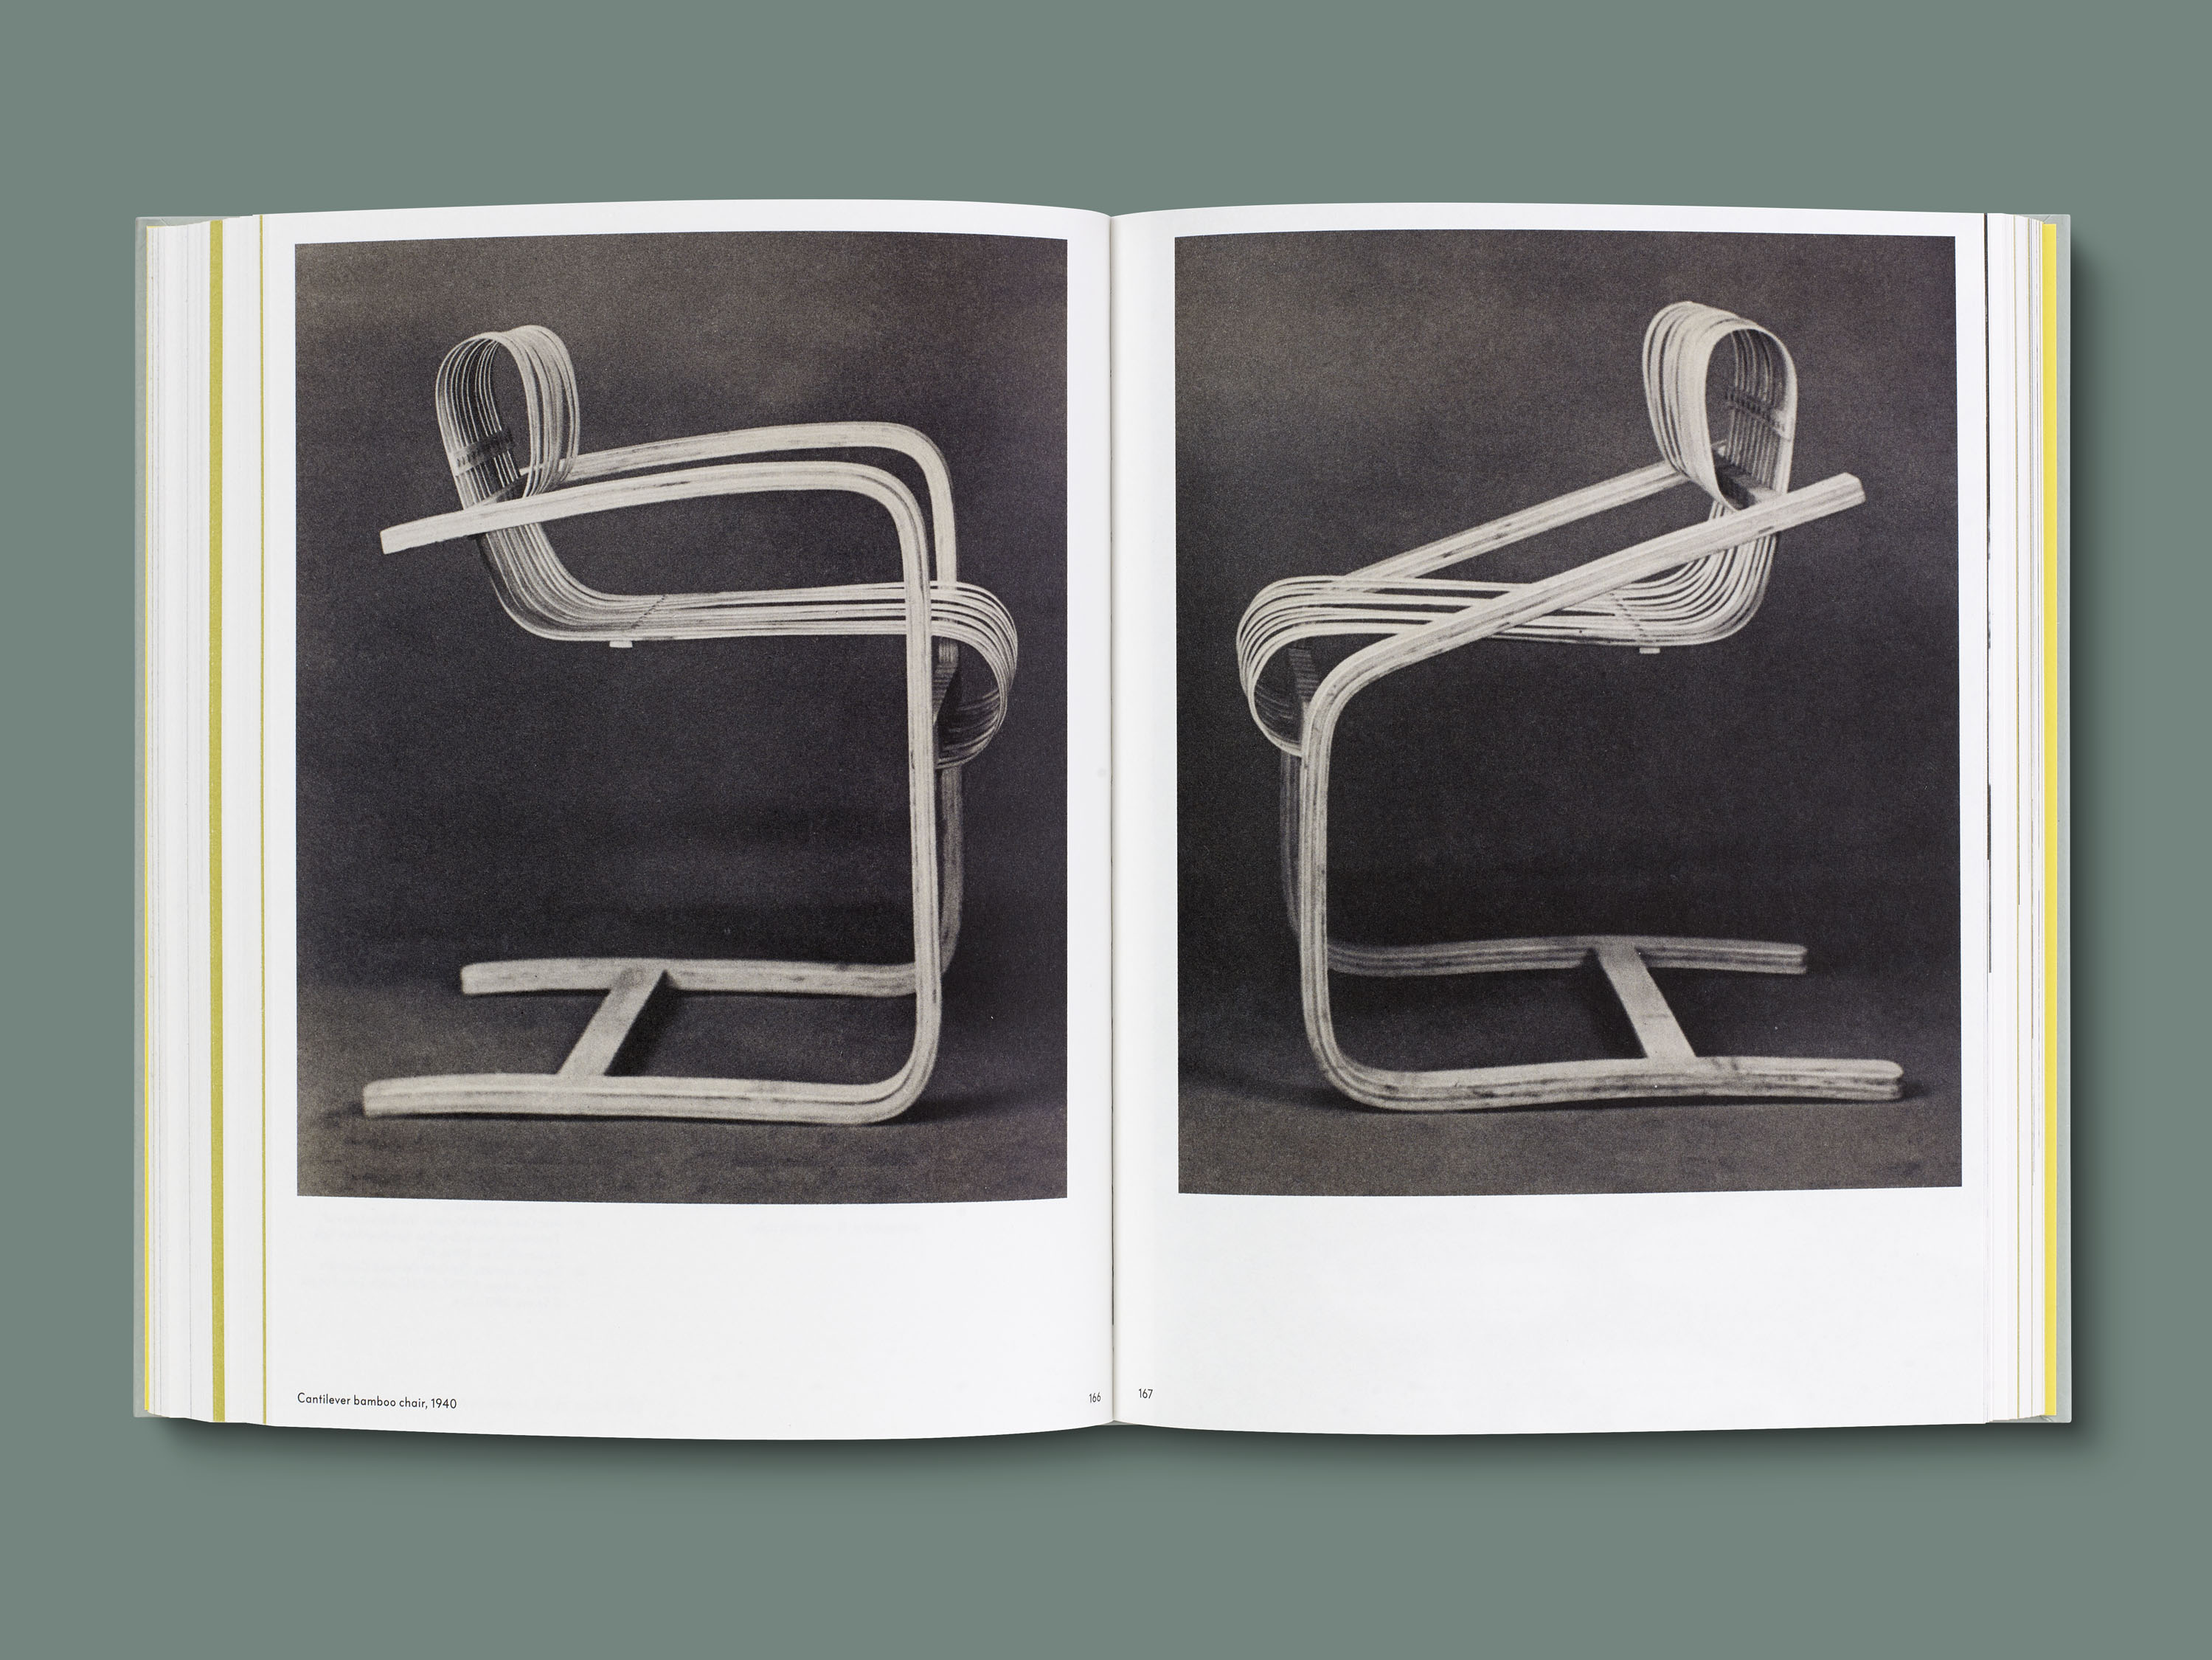 Charlotte Perriand: The Modern Life → A Practice for Everyday Life